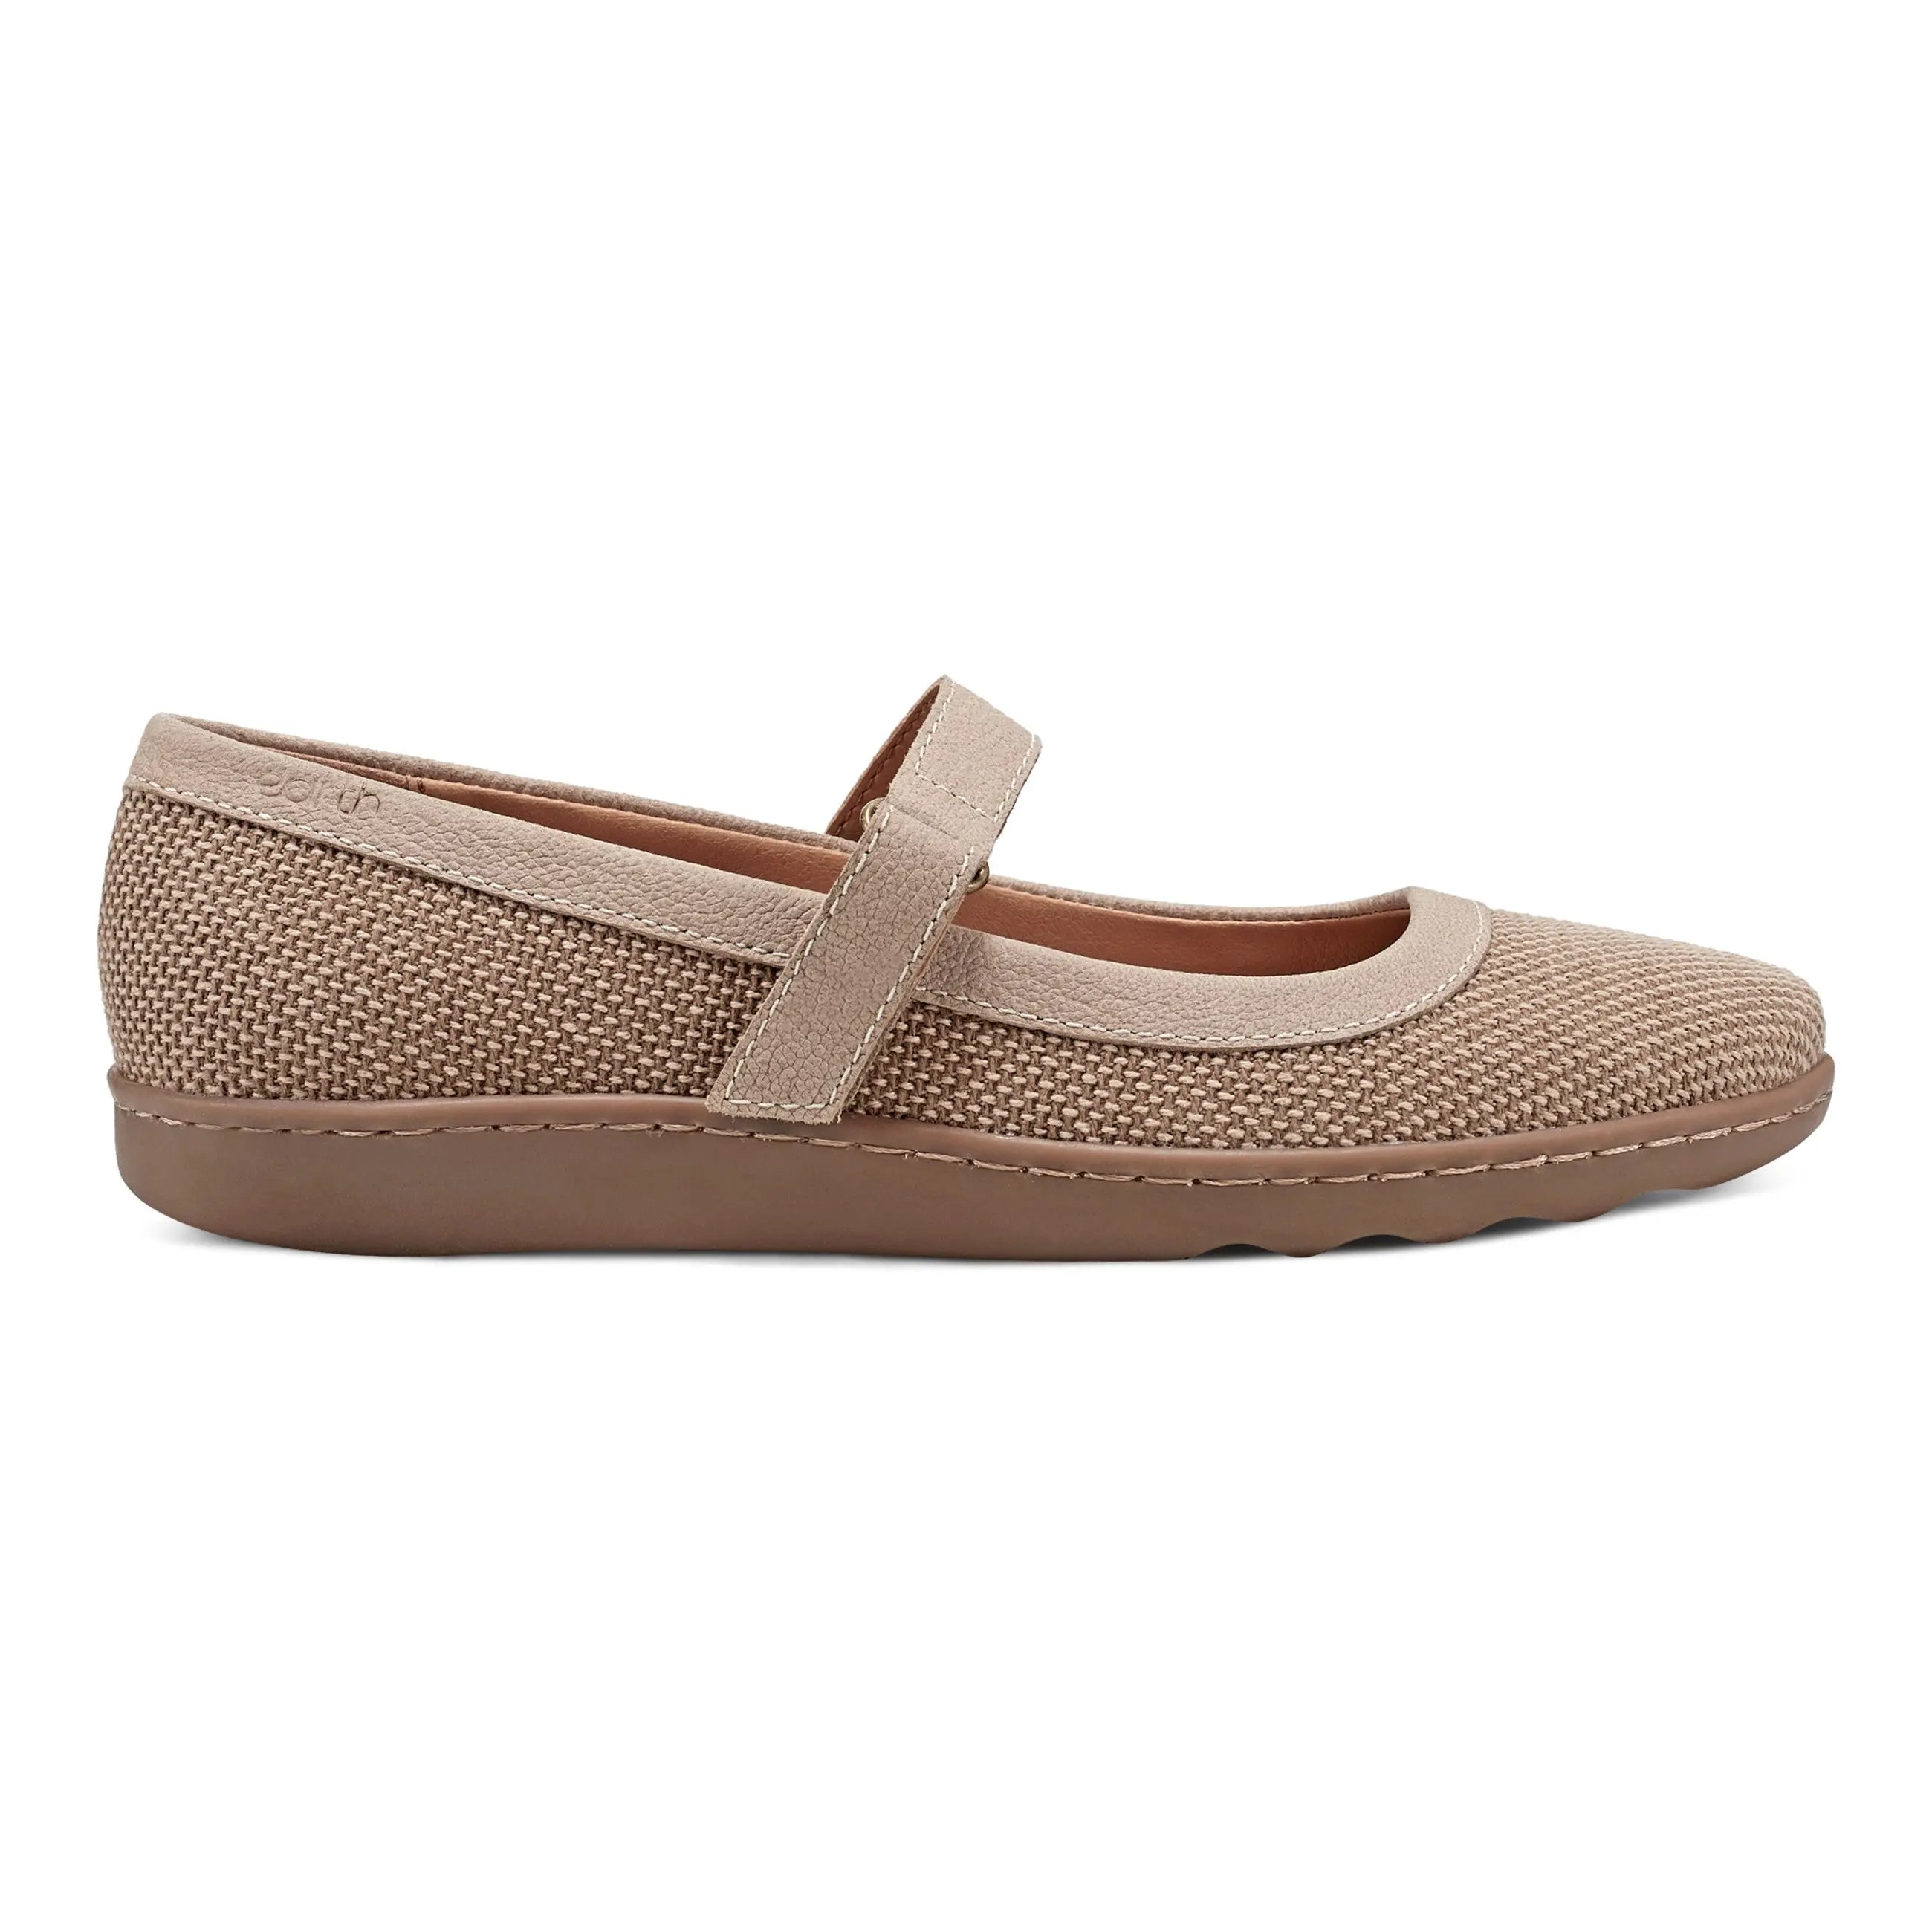 Lorali Round Toe Casual Ballet Flats